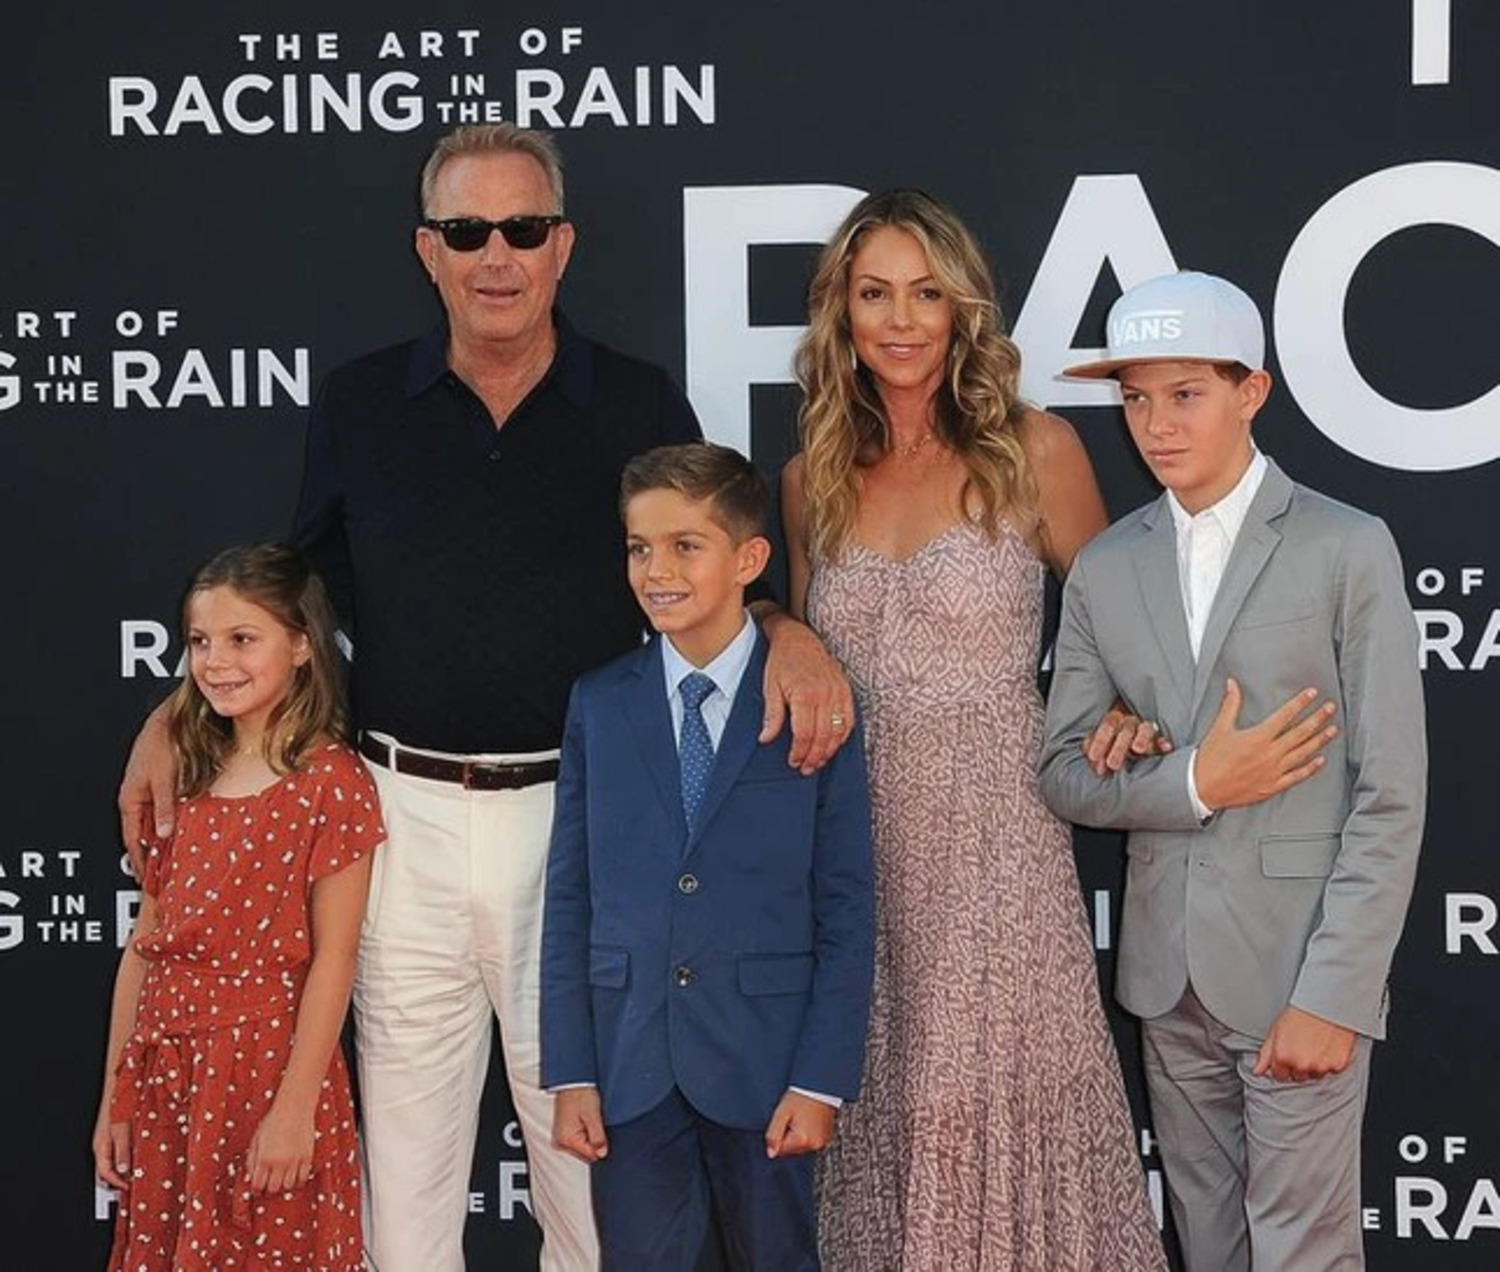 Christine Baumgartner and Kevin Costner with their three kids at the premiere of The Art in the Racing Rain